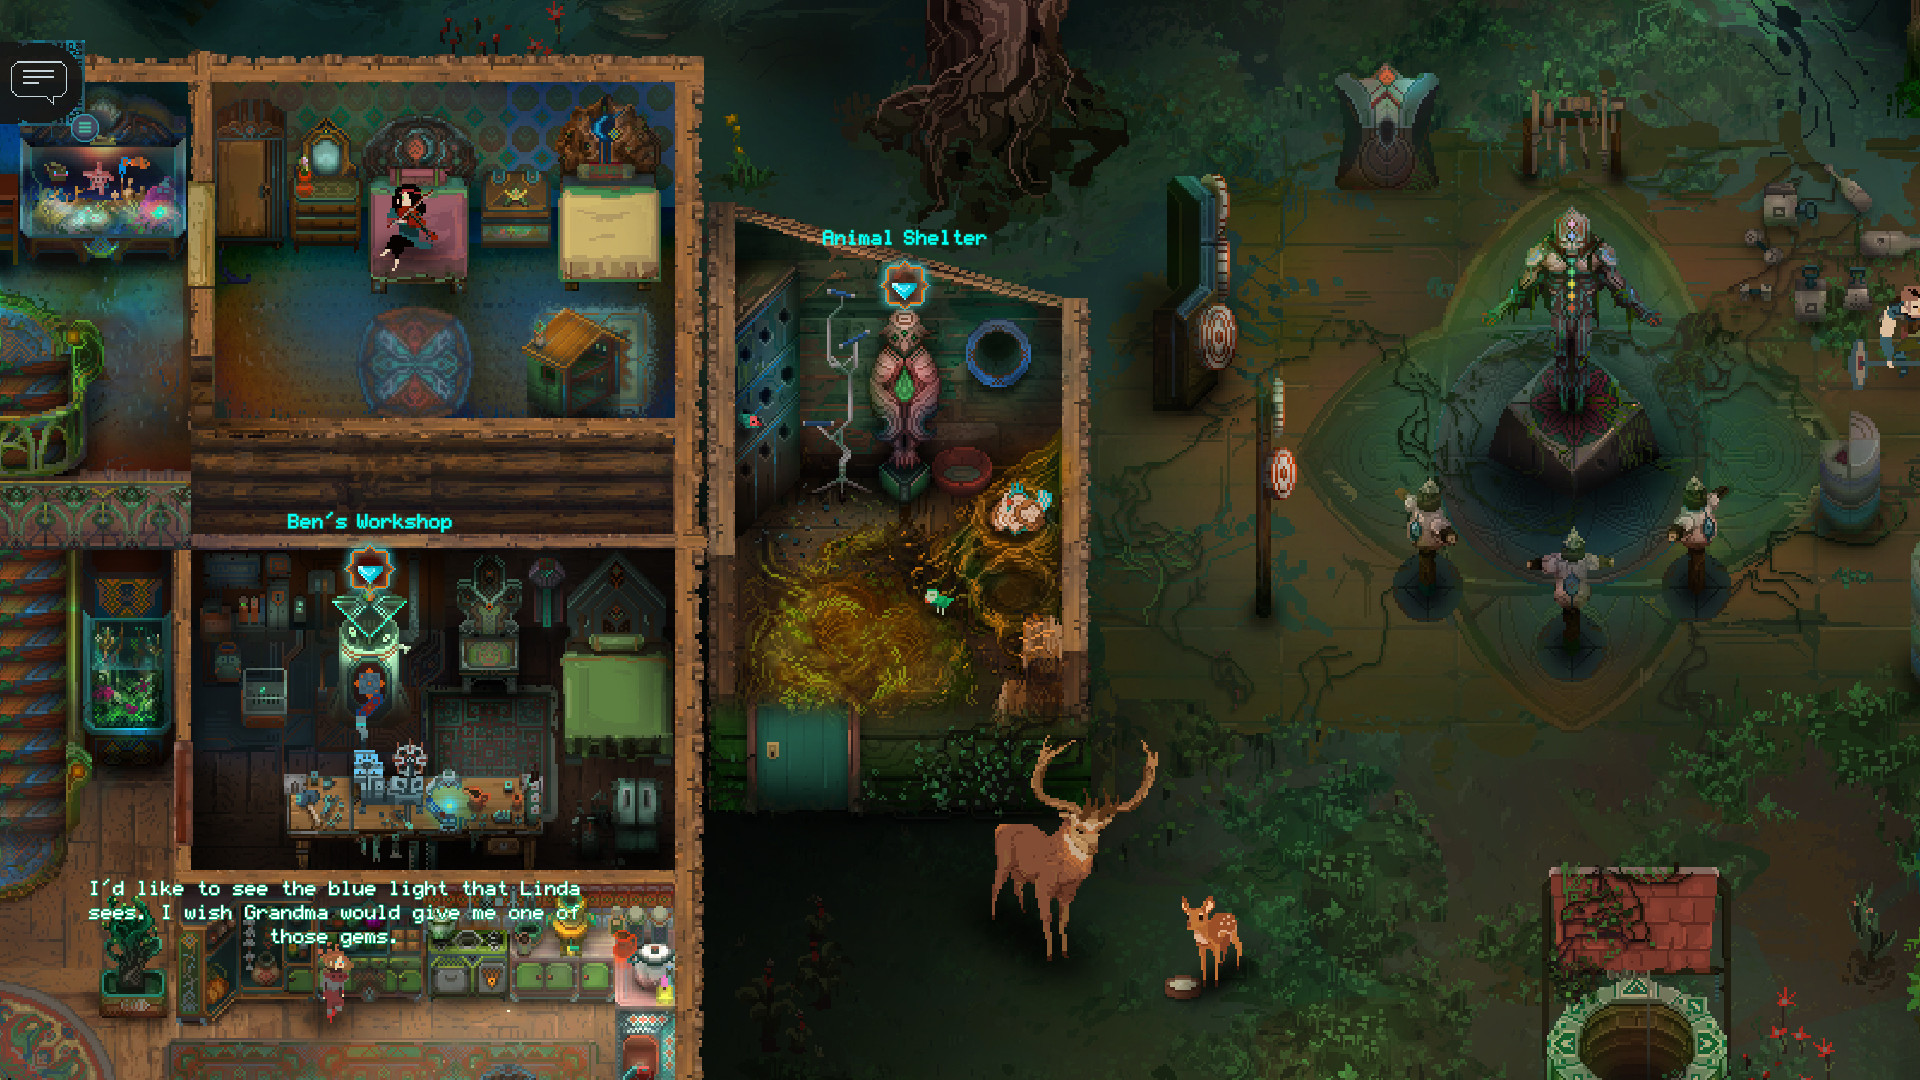 Children of Morta: Paws and Claws on Steam